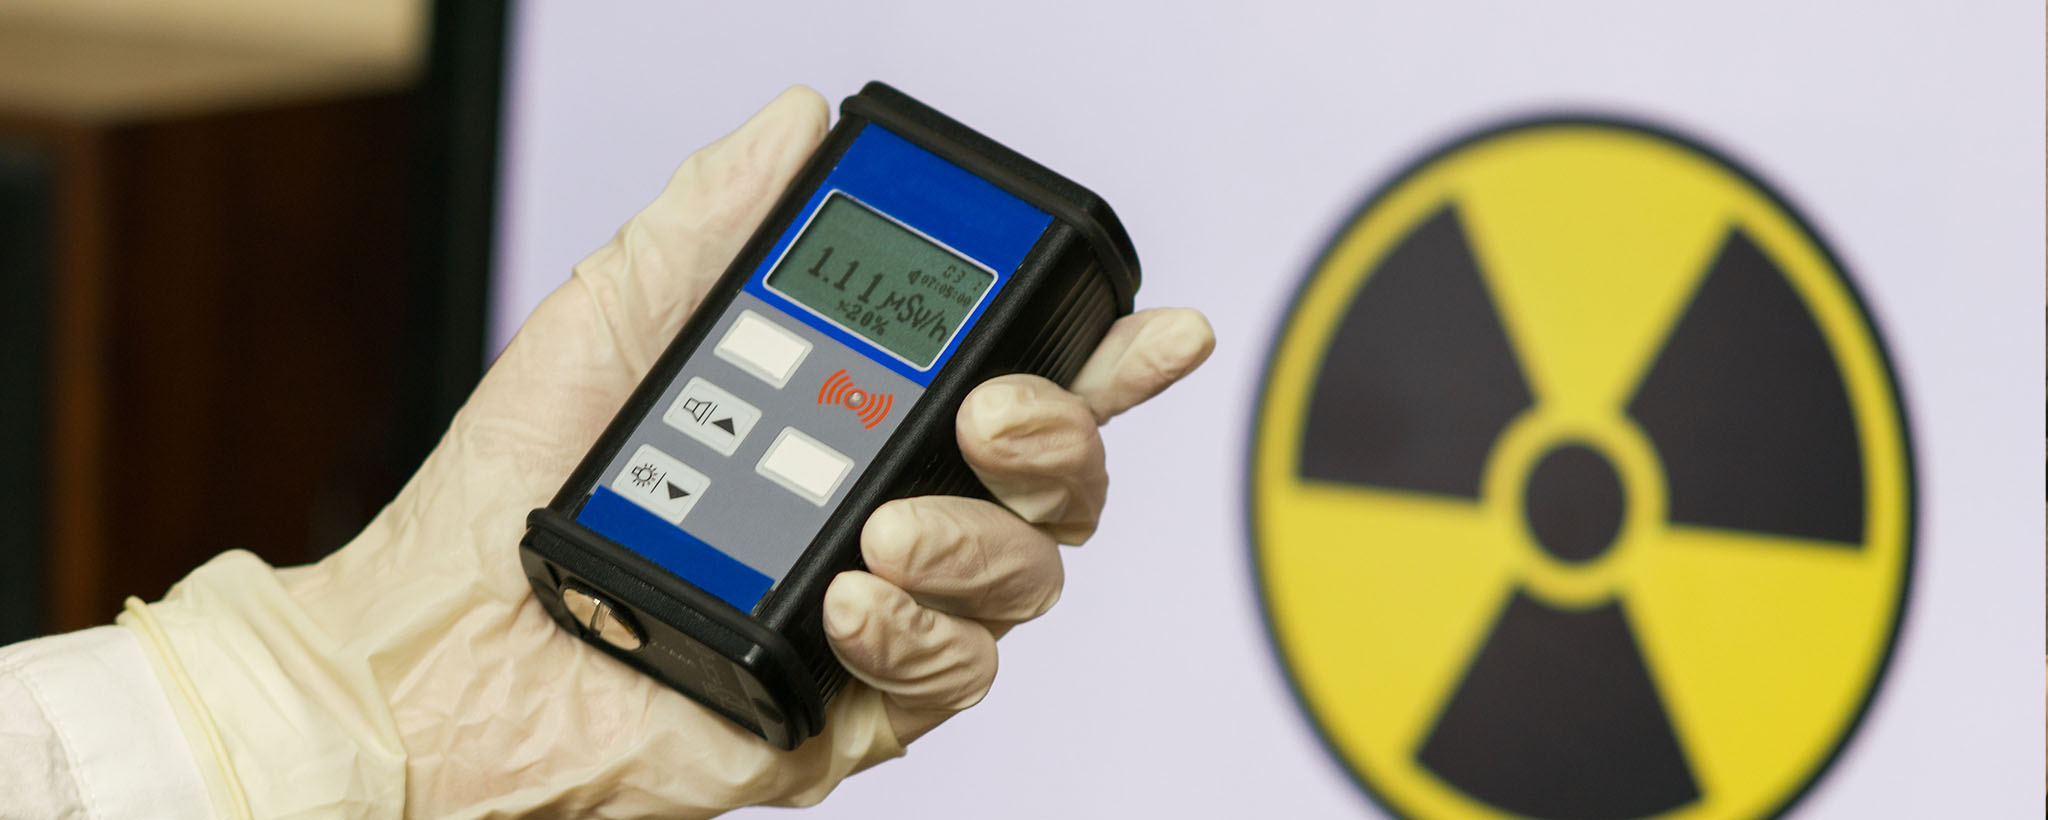 A hand holding a Geiger counter measuring radiation exposure 